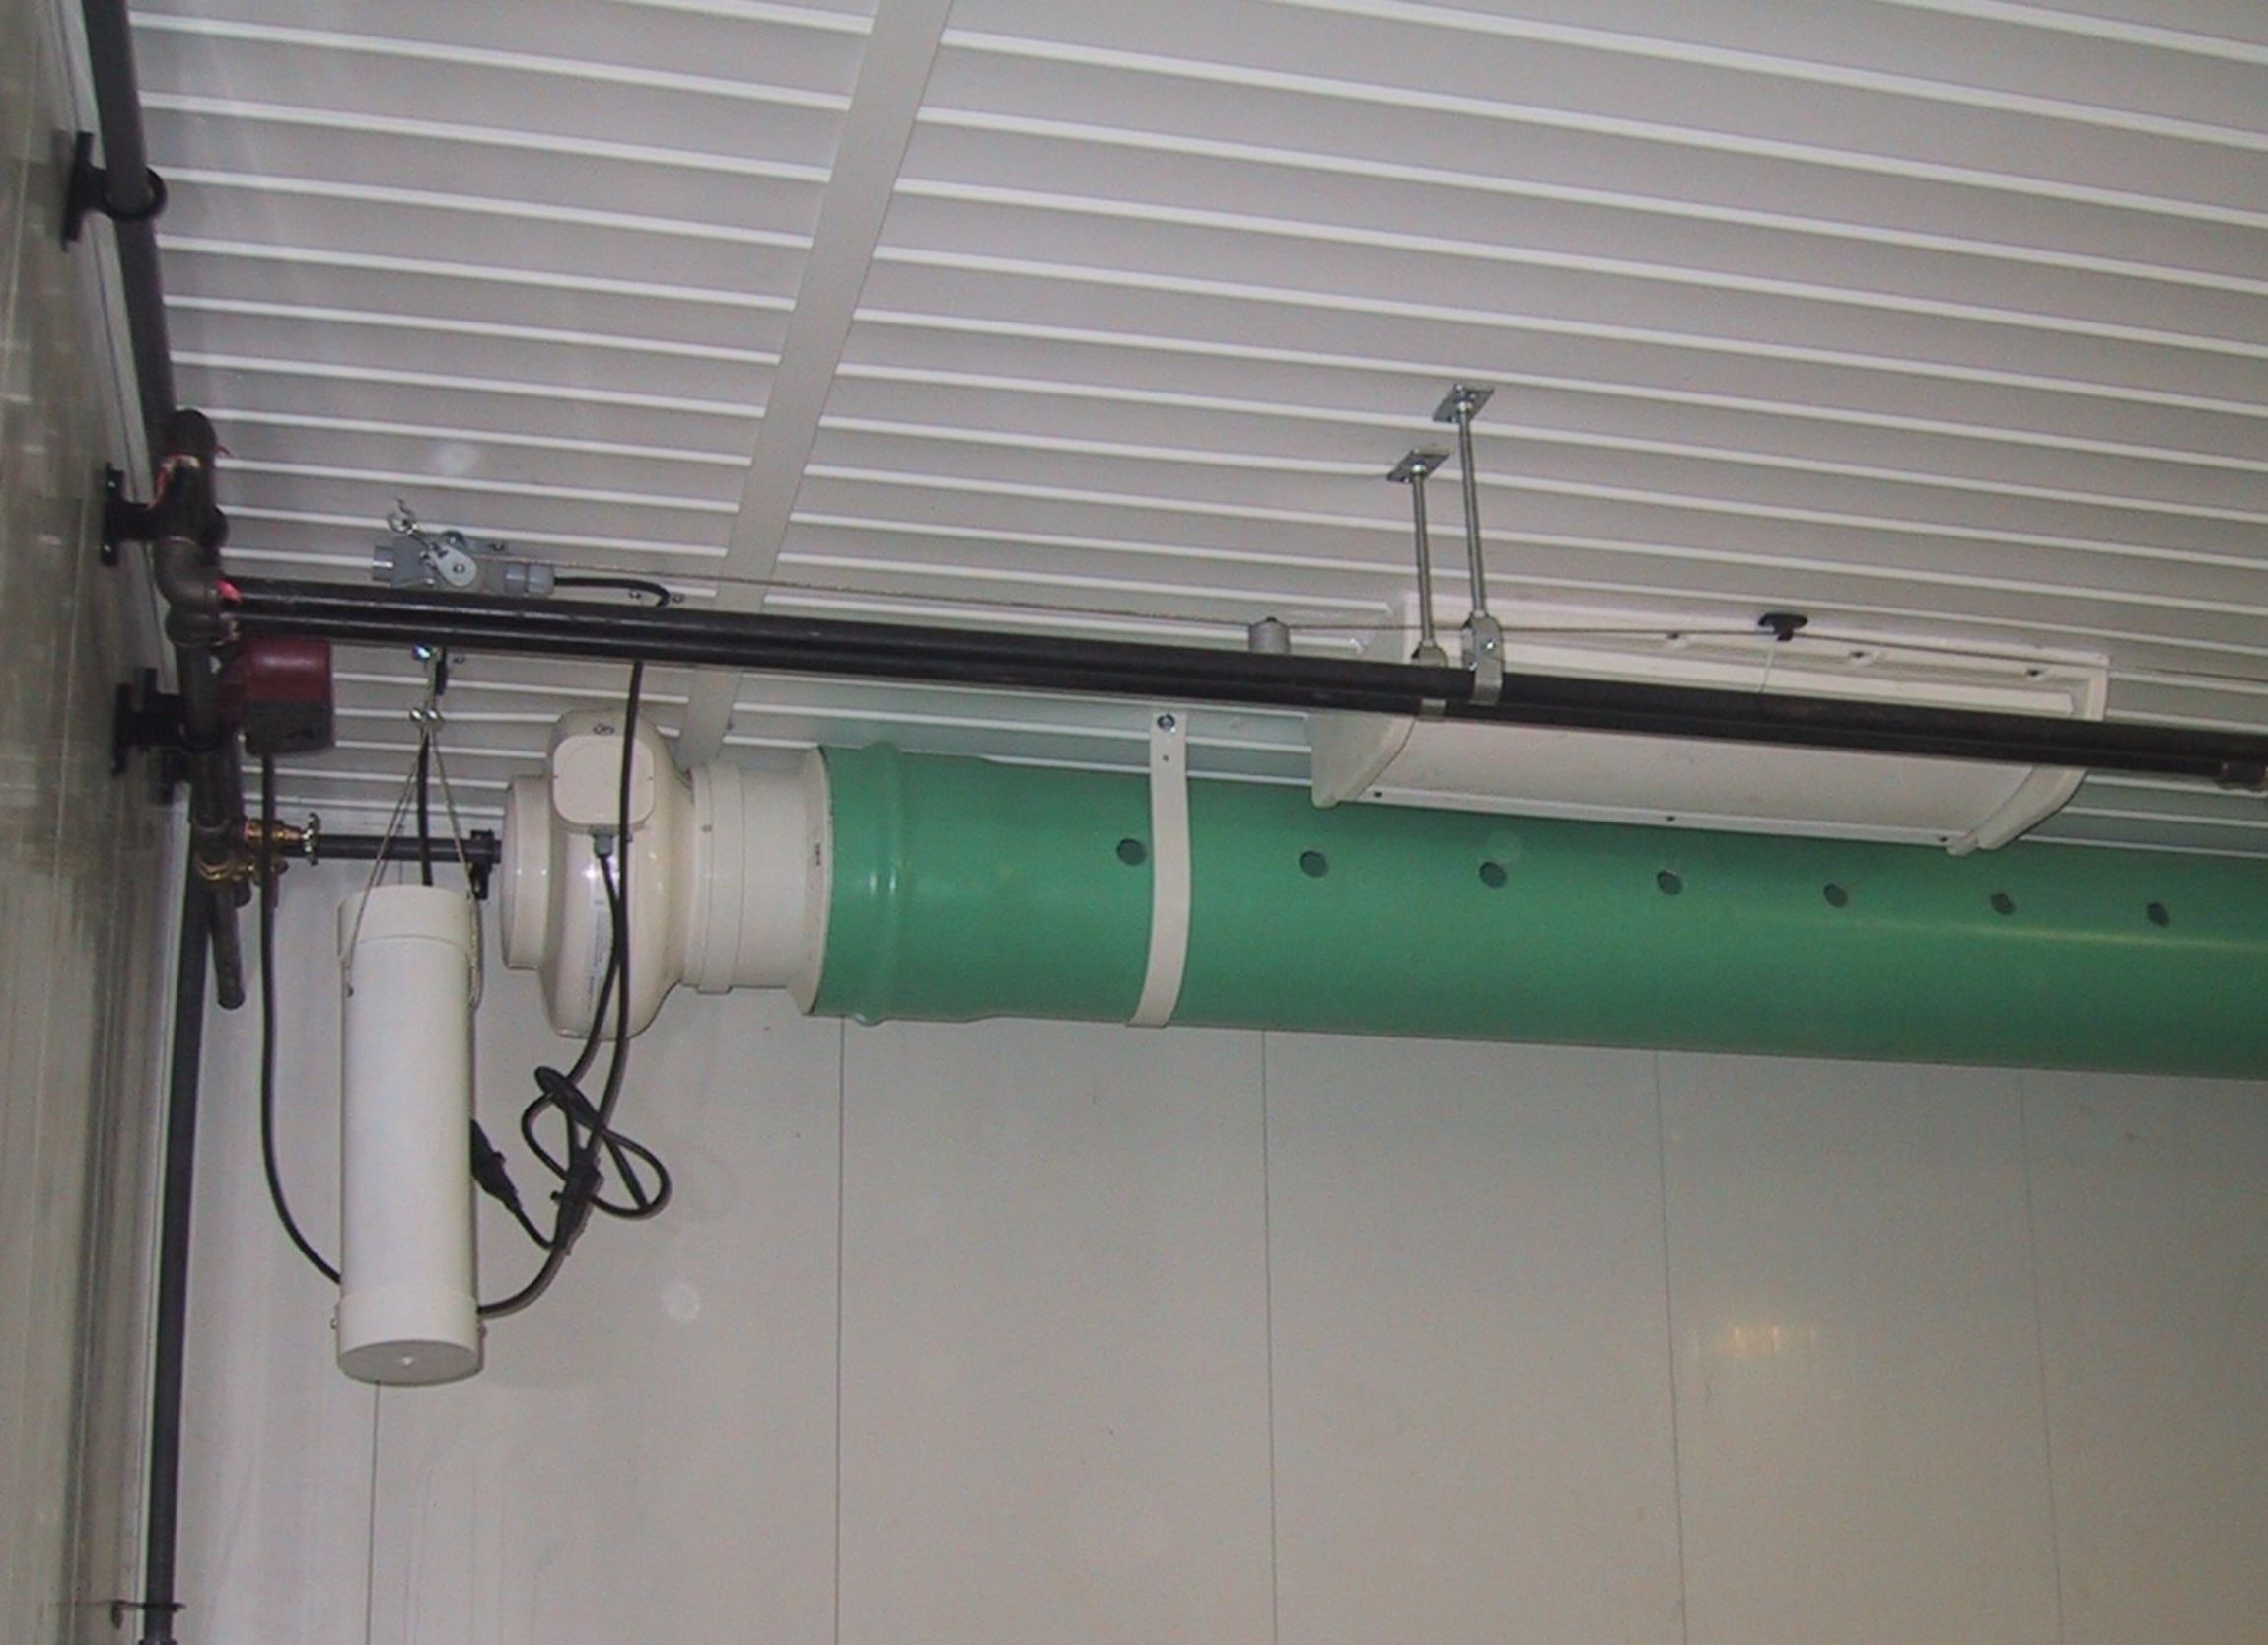 A rigid duct (mounted at ceiling height) with a fan on the left end and air distribution holes, along the duct, to assist in air circulation